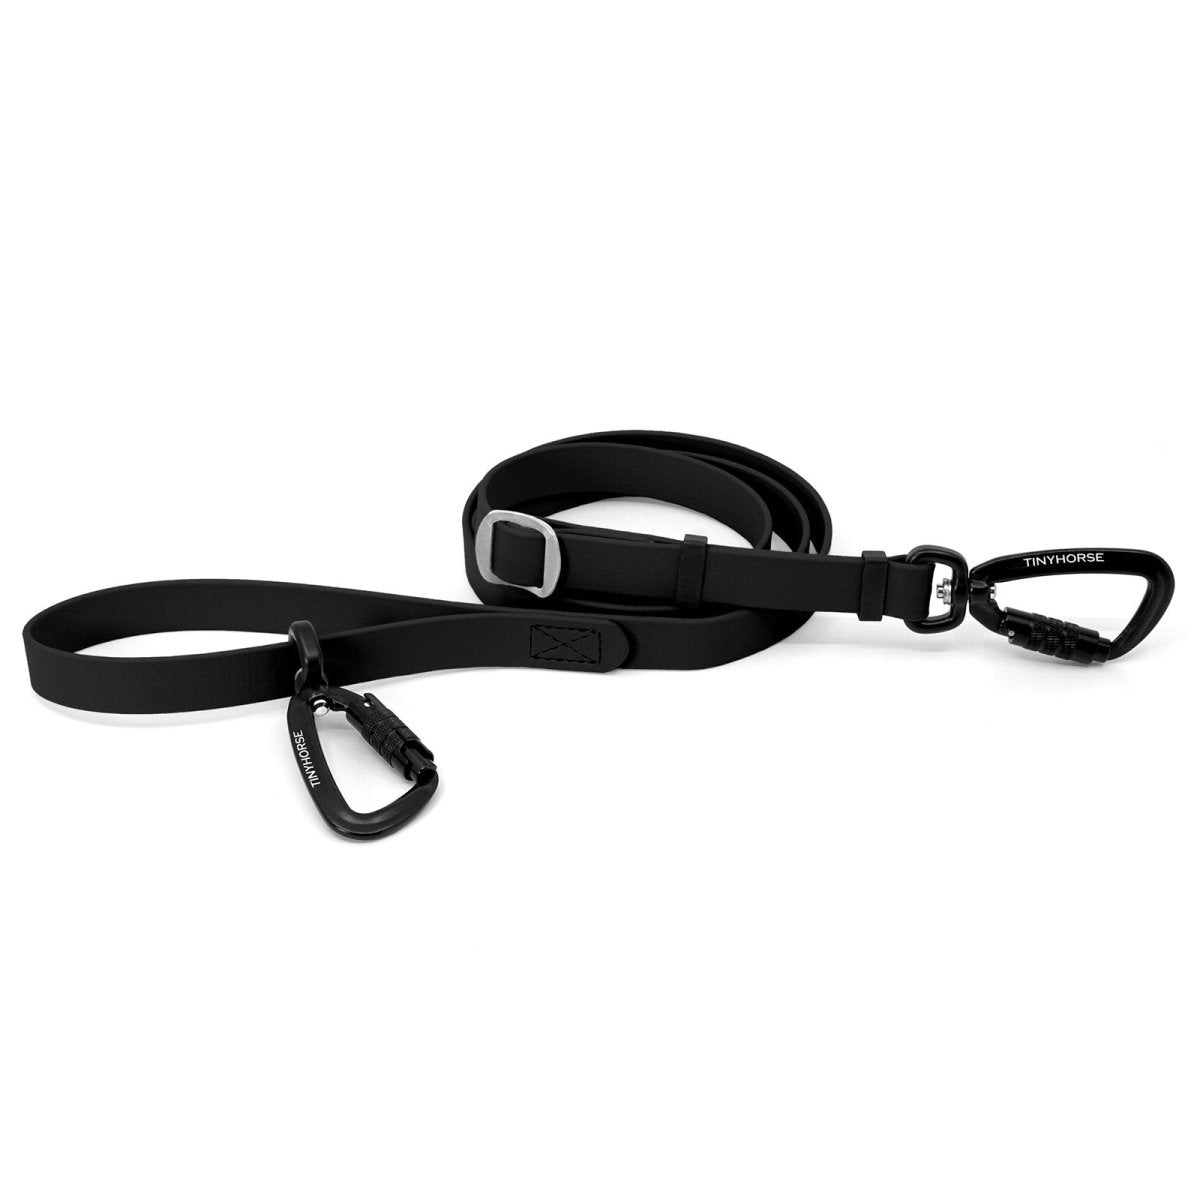 An adjustable black-coloured Lead-All Pro Extra made of BioThane with 2 auto-locking carabiners